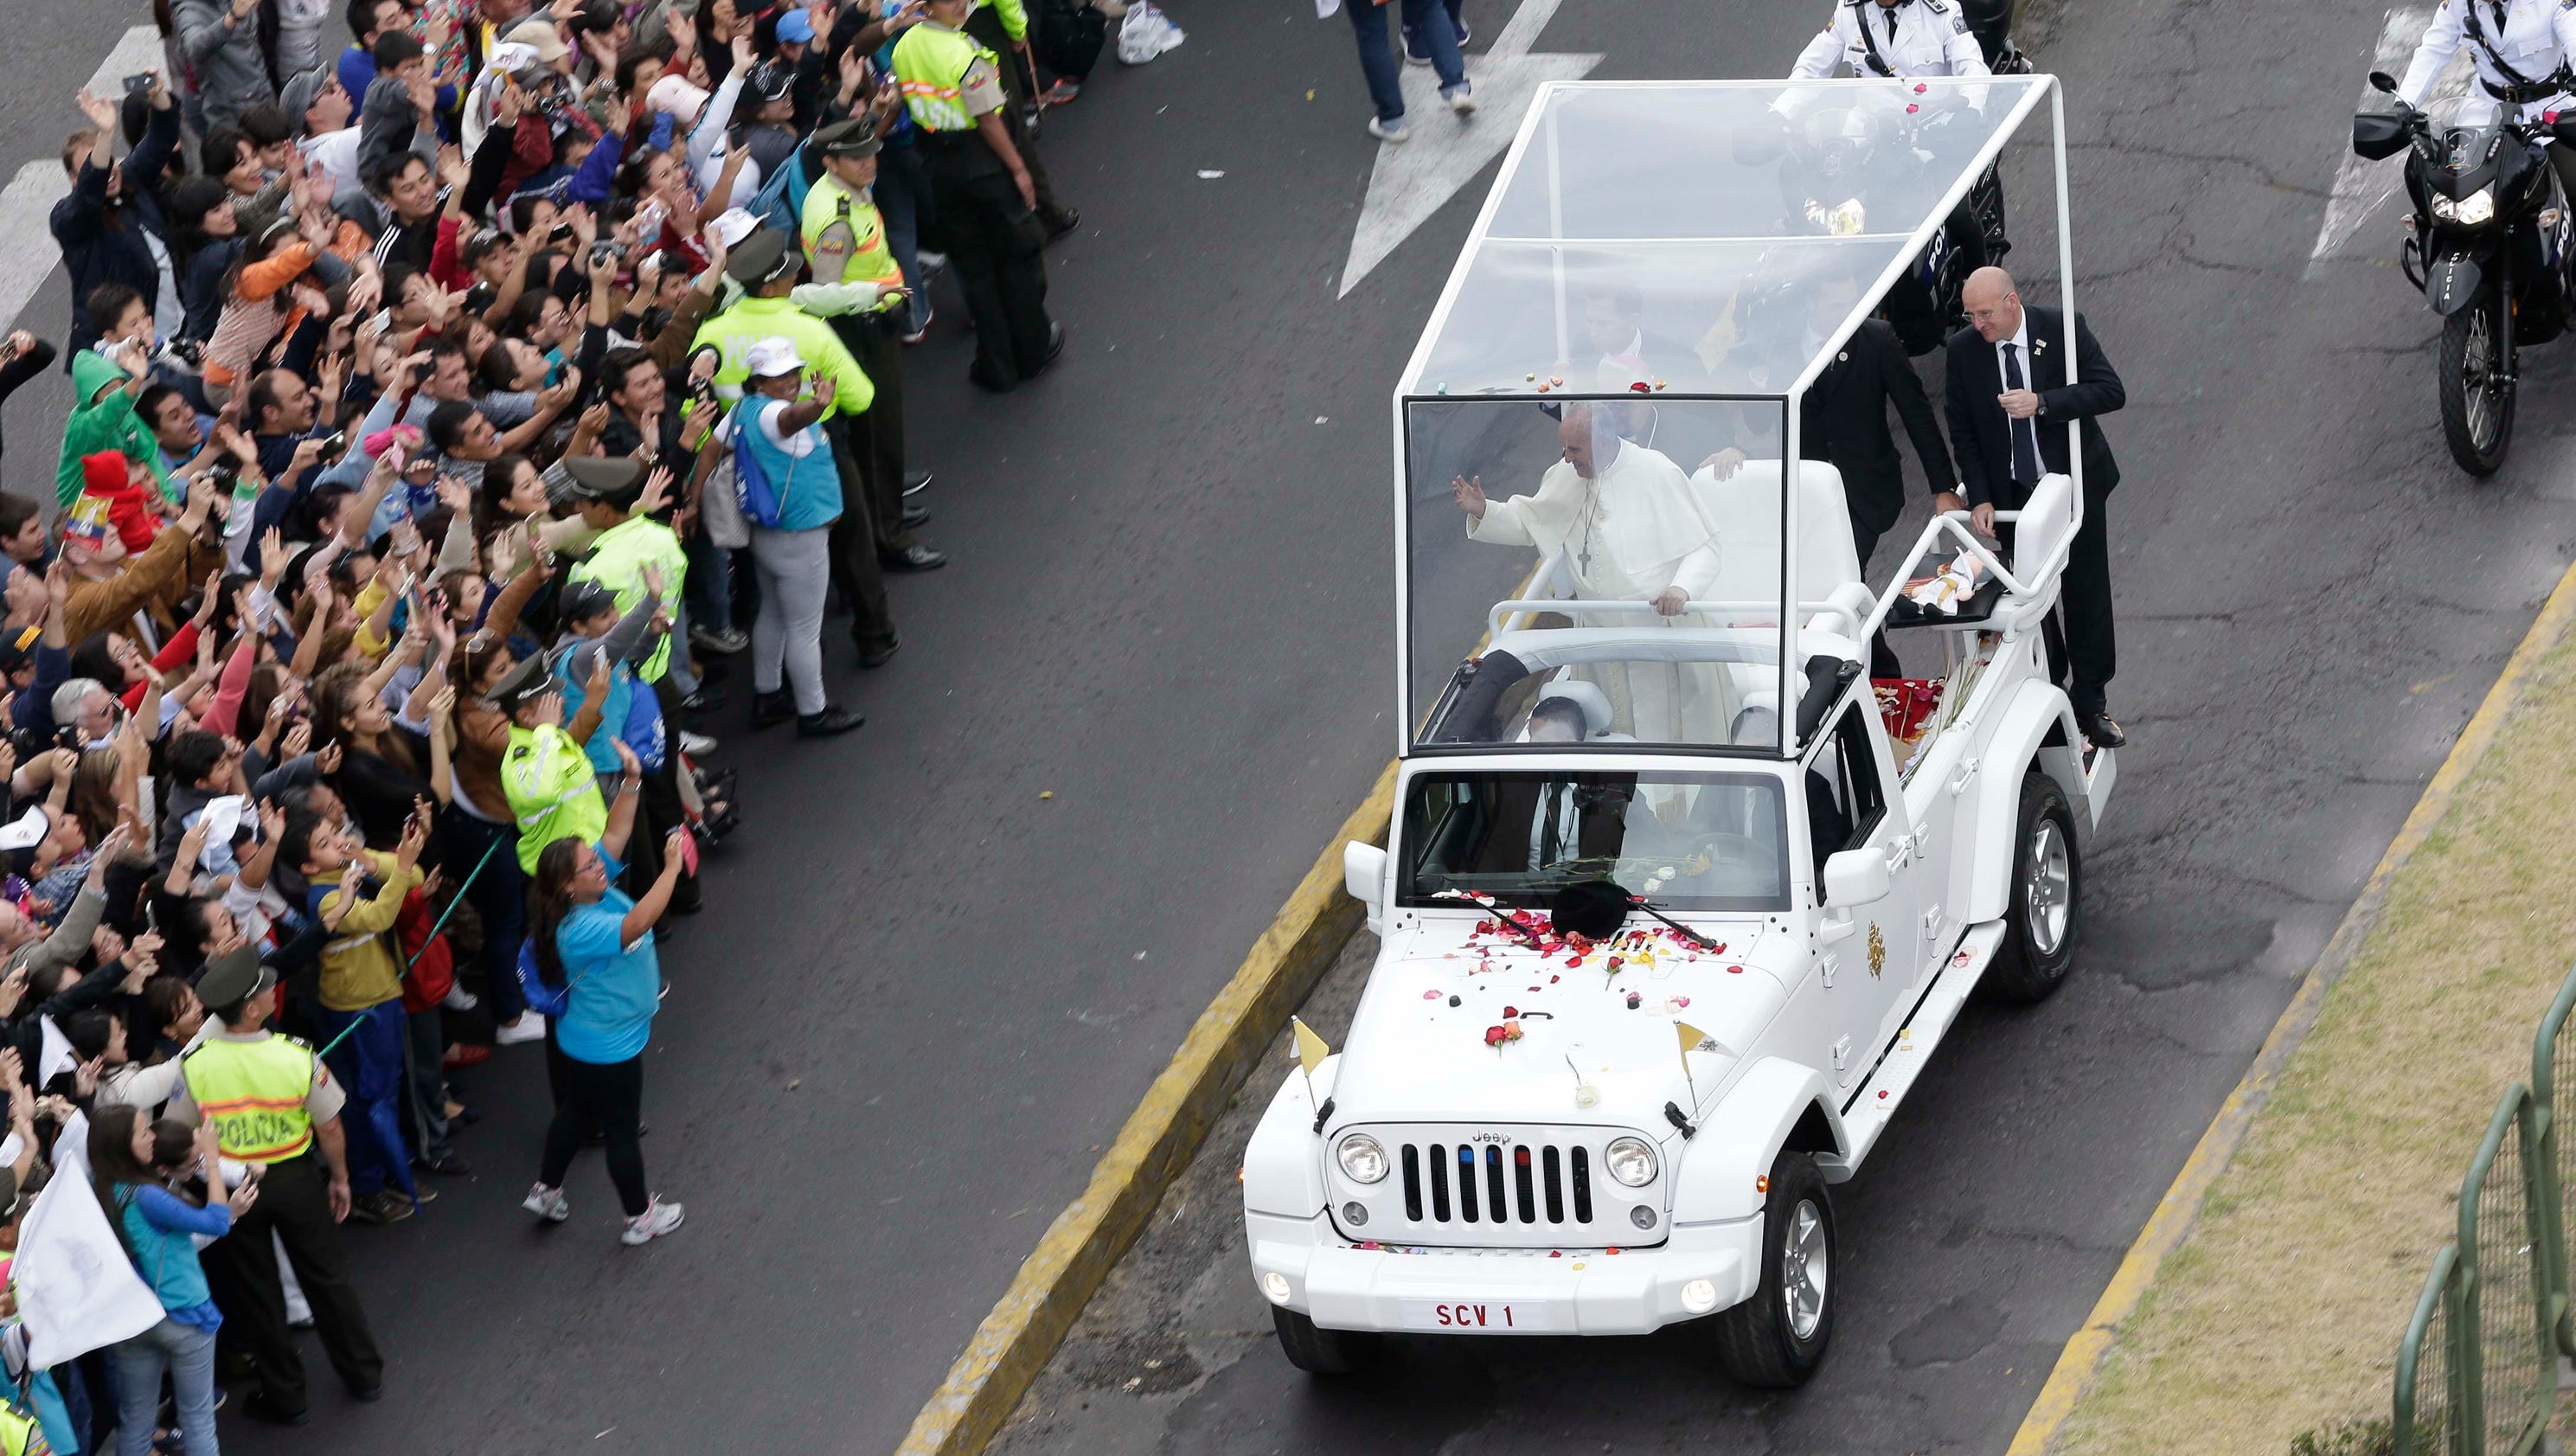 Pope Francis' popemobile is Jeep Wrangler for U.S. visit